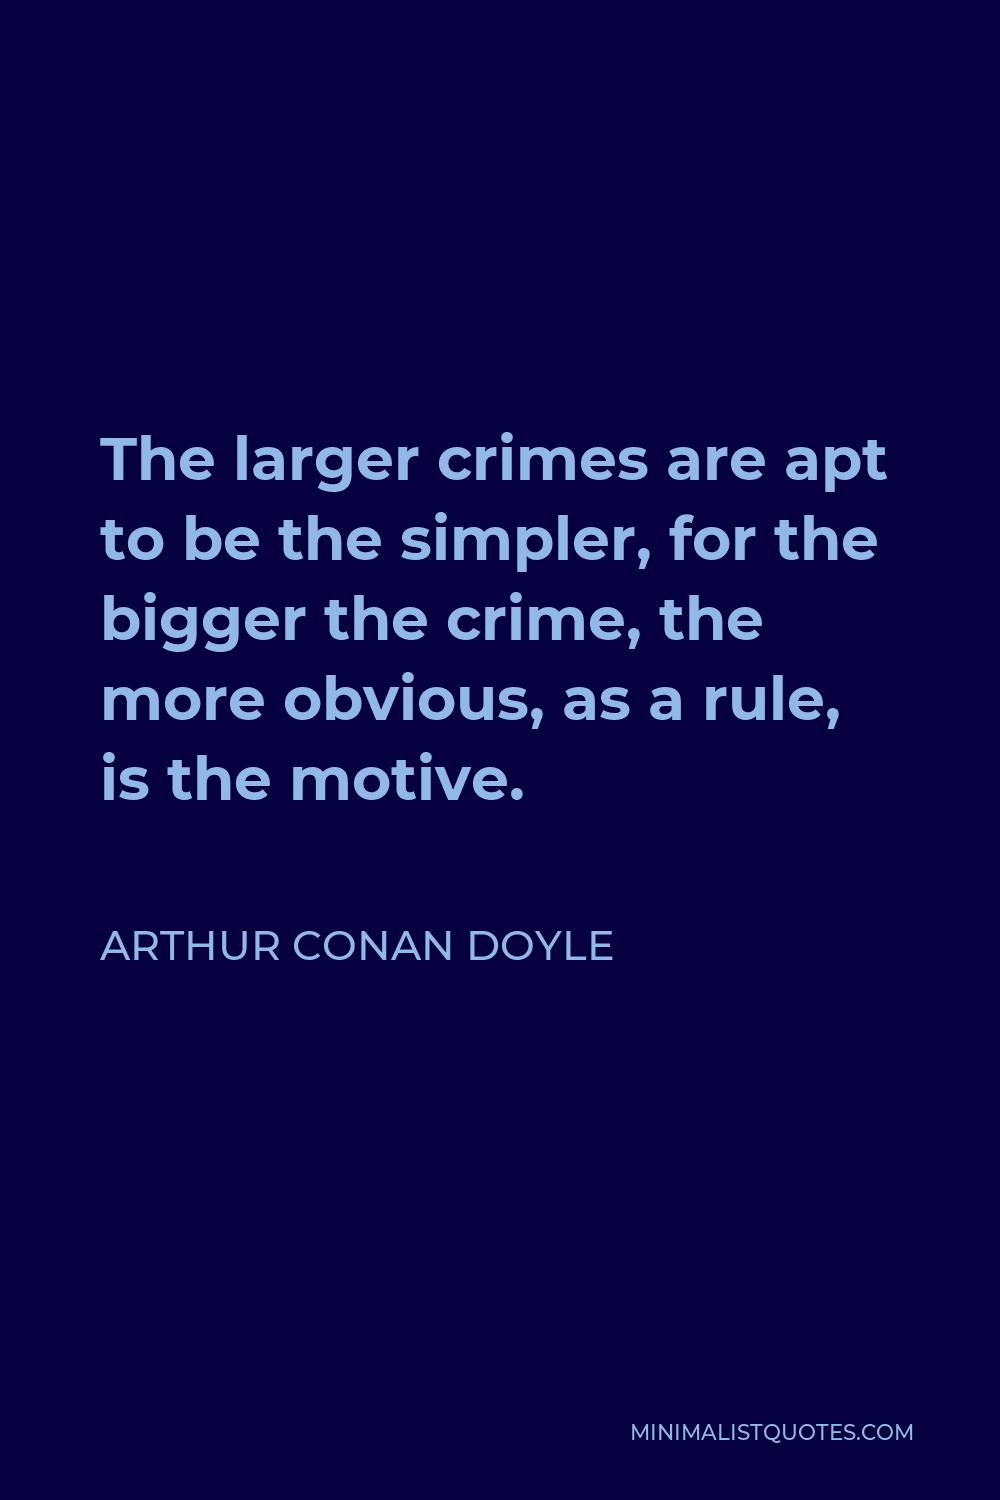 Arthur Conan Doyle Quote - The larger crimes are apt to be the simpler, for the bigger the crime, the more obvious, as a rule, is the motive.